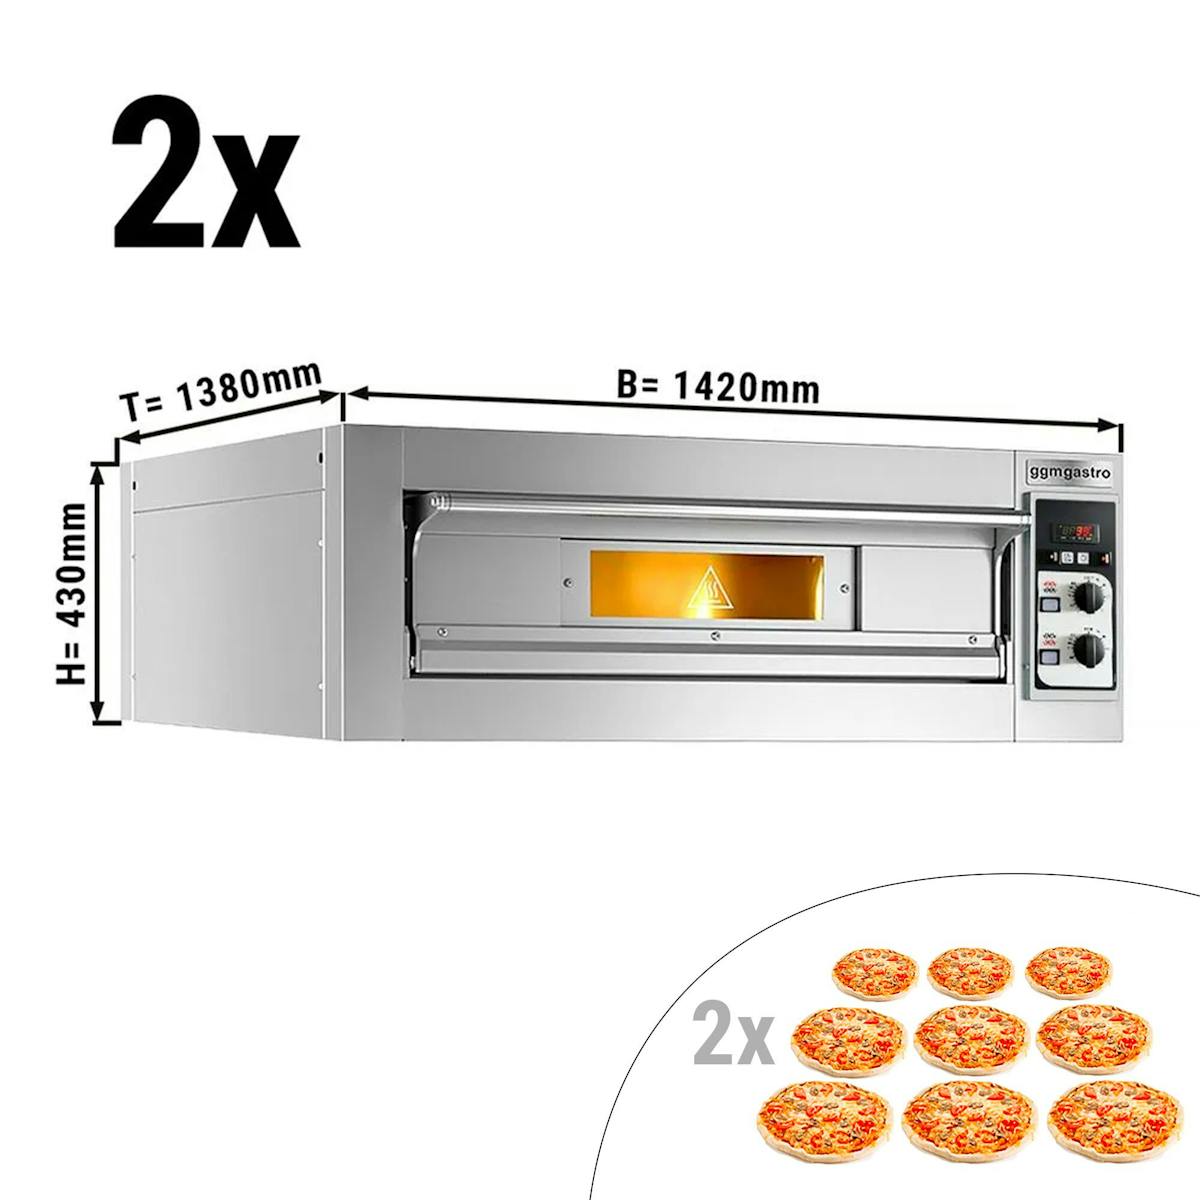 (2 pieces) Electric pizza oven - 9+9x 35cm - Manual